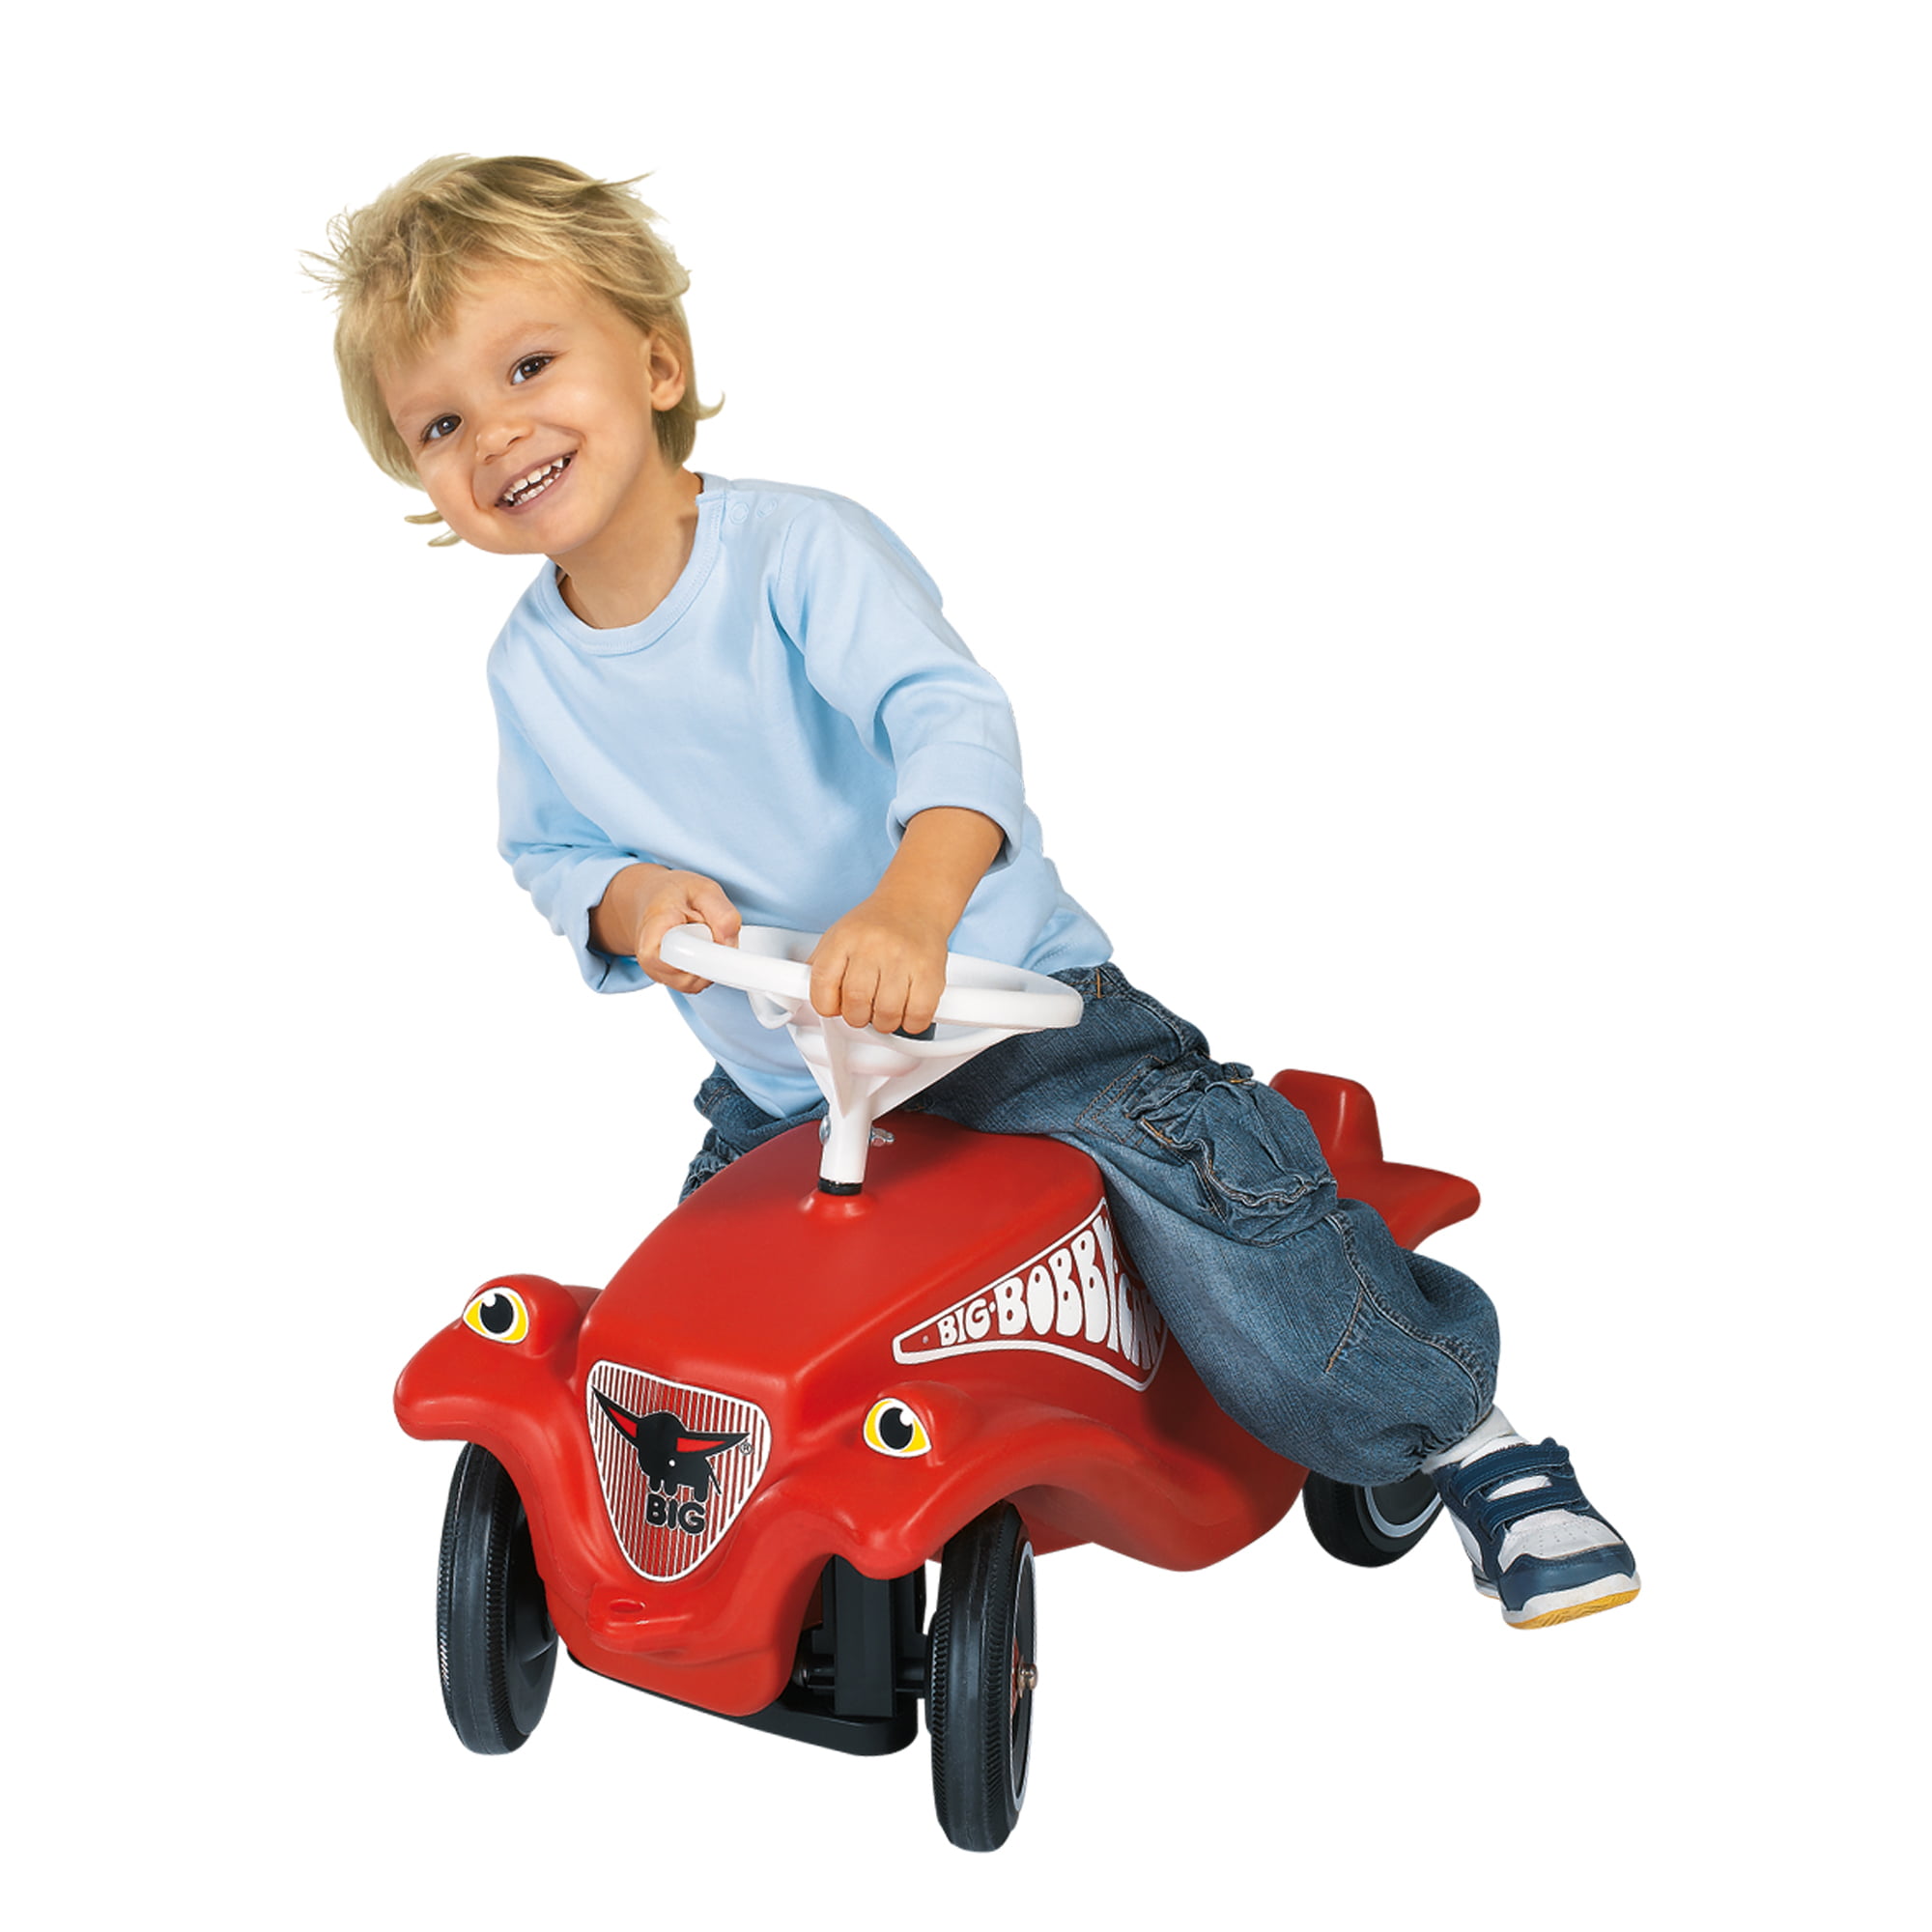 Bobby Car by BIG scoot along toys are great ride on toys for kids